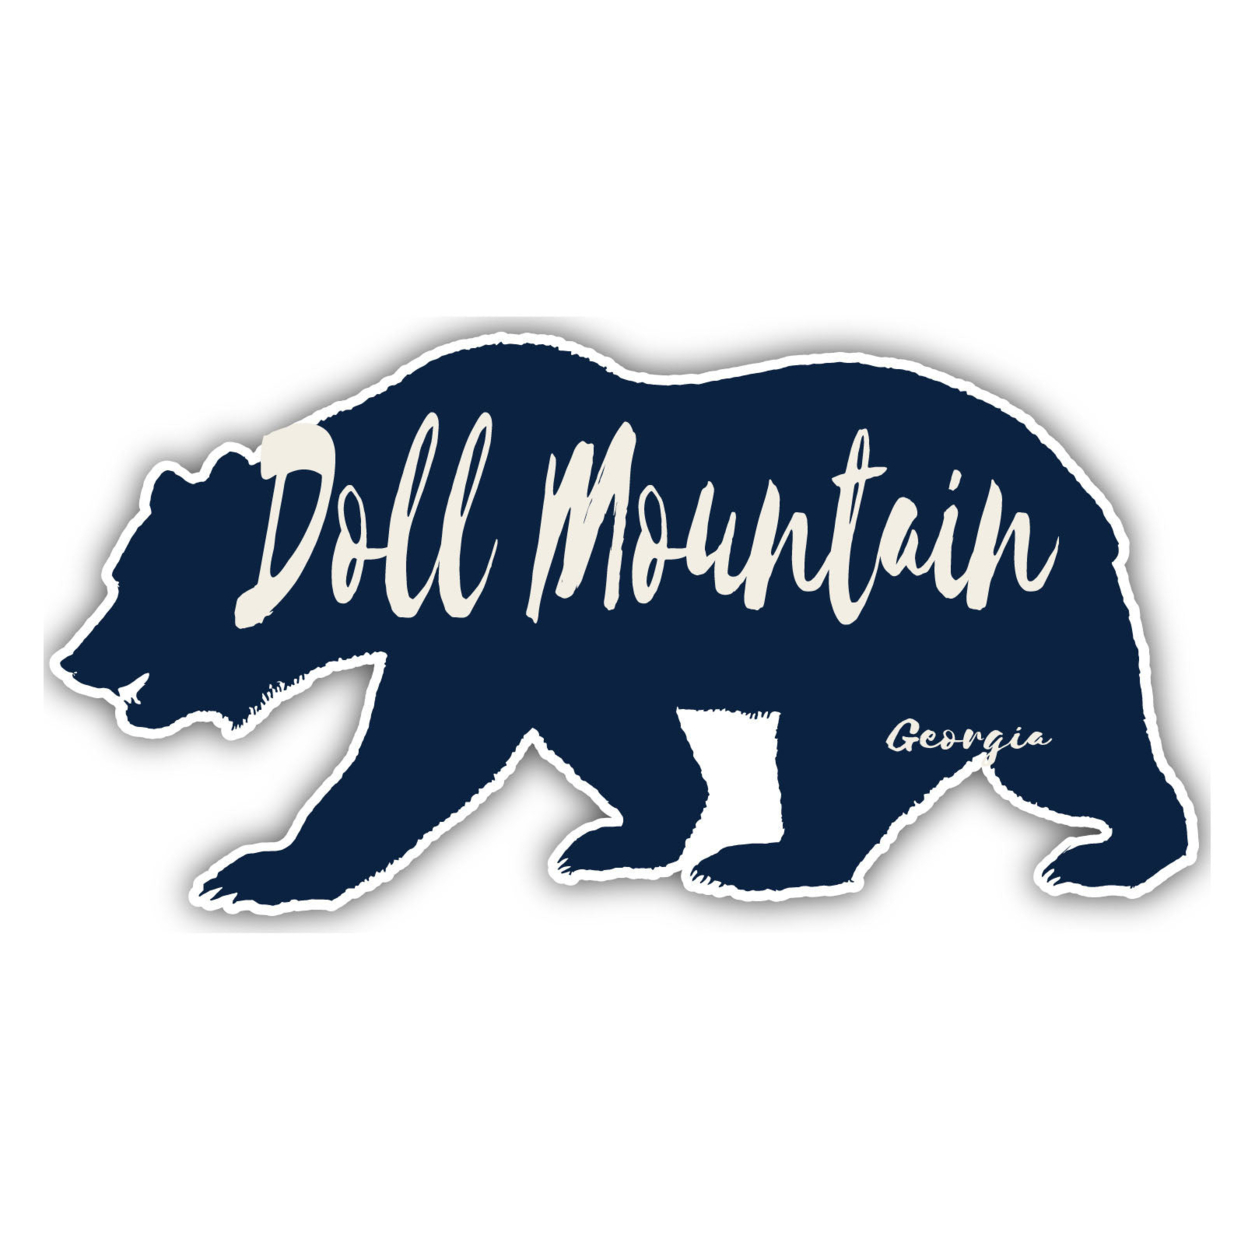 Doll Mountain Georgia Souvenir Decorative Stickers (Choose Theme And Size) - 4-Pack, 6-Inch, Great Outdoors